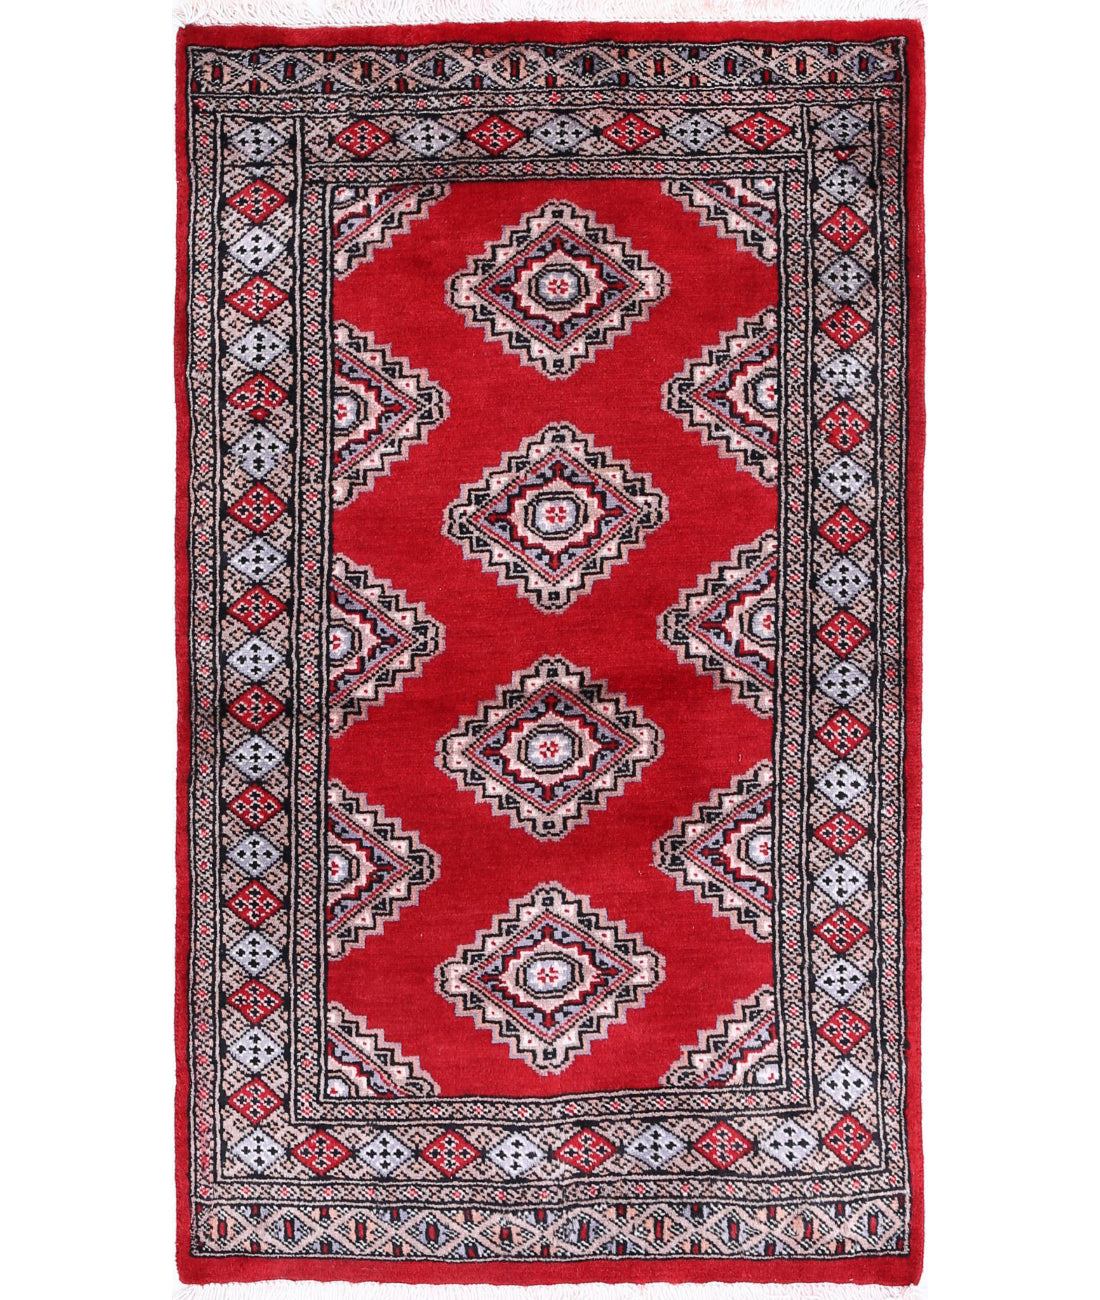 Hand Knotted Tribal Bokhara Wool Rug - 2&#39;6&#39;&#39; x 4&#39;2&#39;&#39; 2&#39;6&#39;&#39; x 4&#39;2&#39;&#39; (75 X 125) / Red / Blue